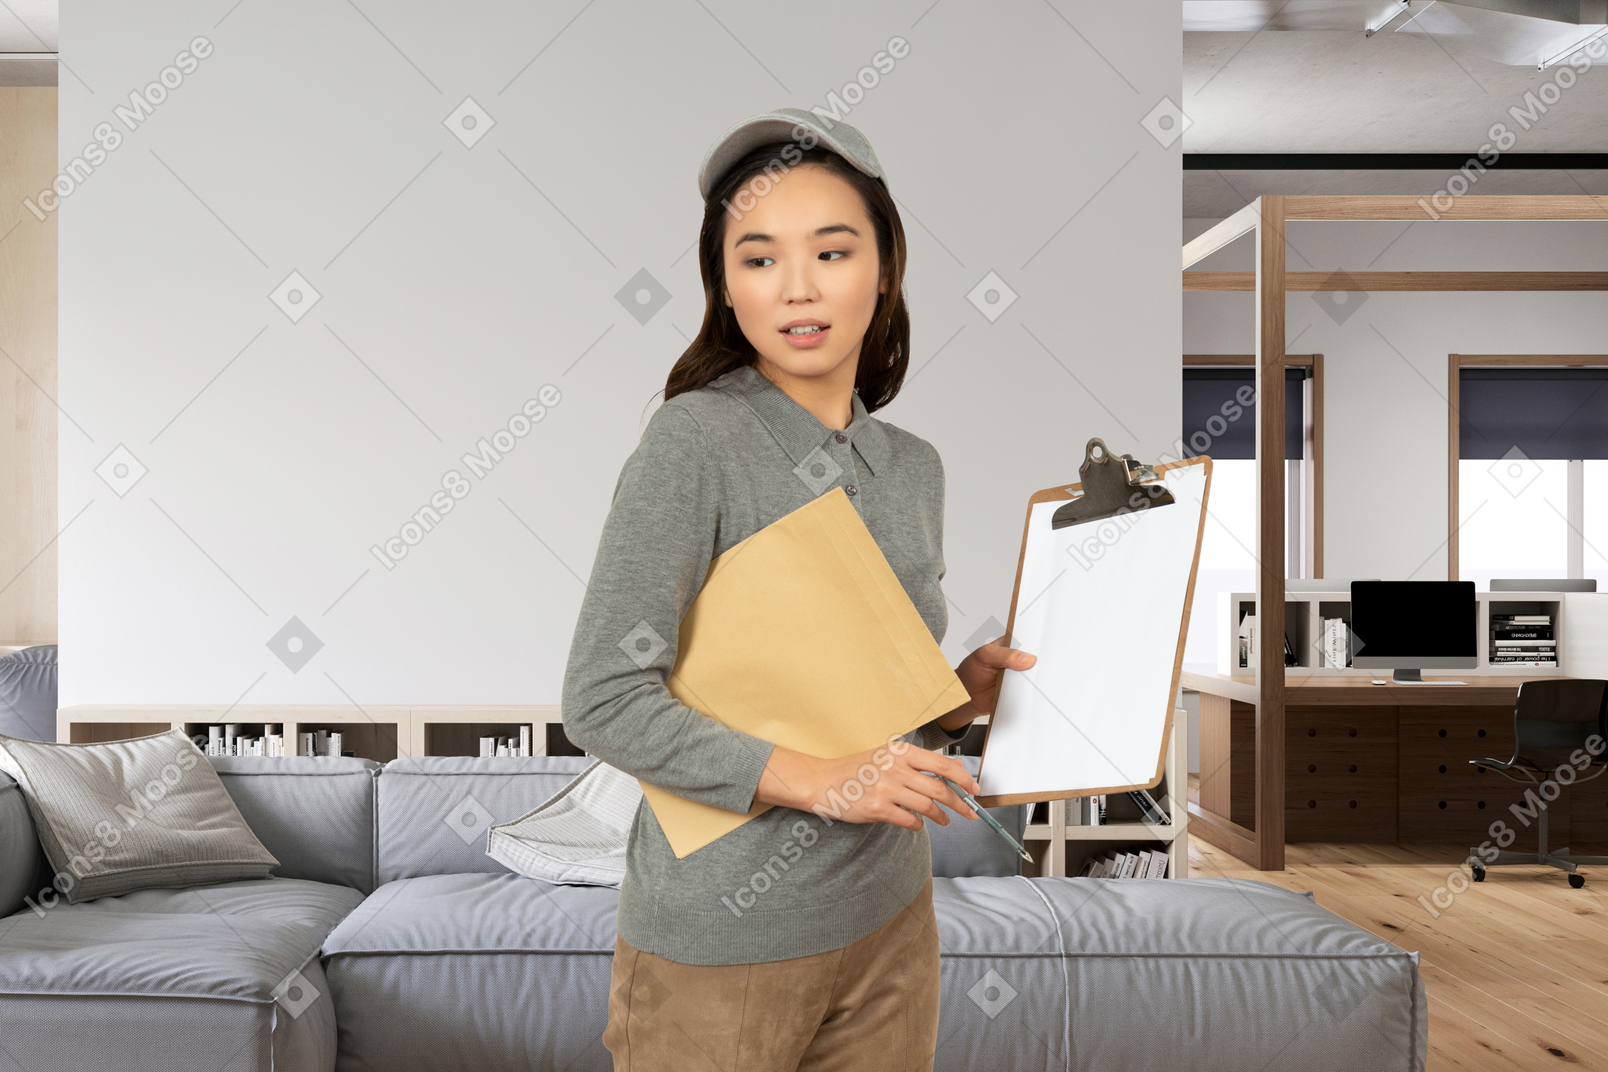 A deliverywoman holding a clipboard and an envelope